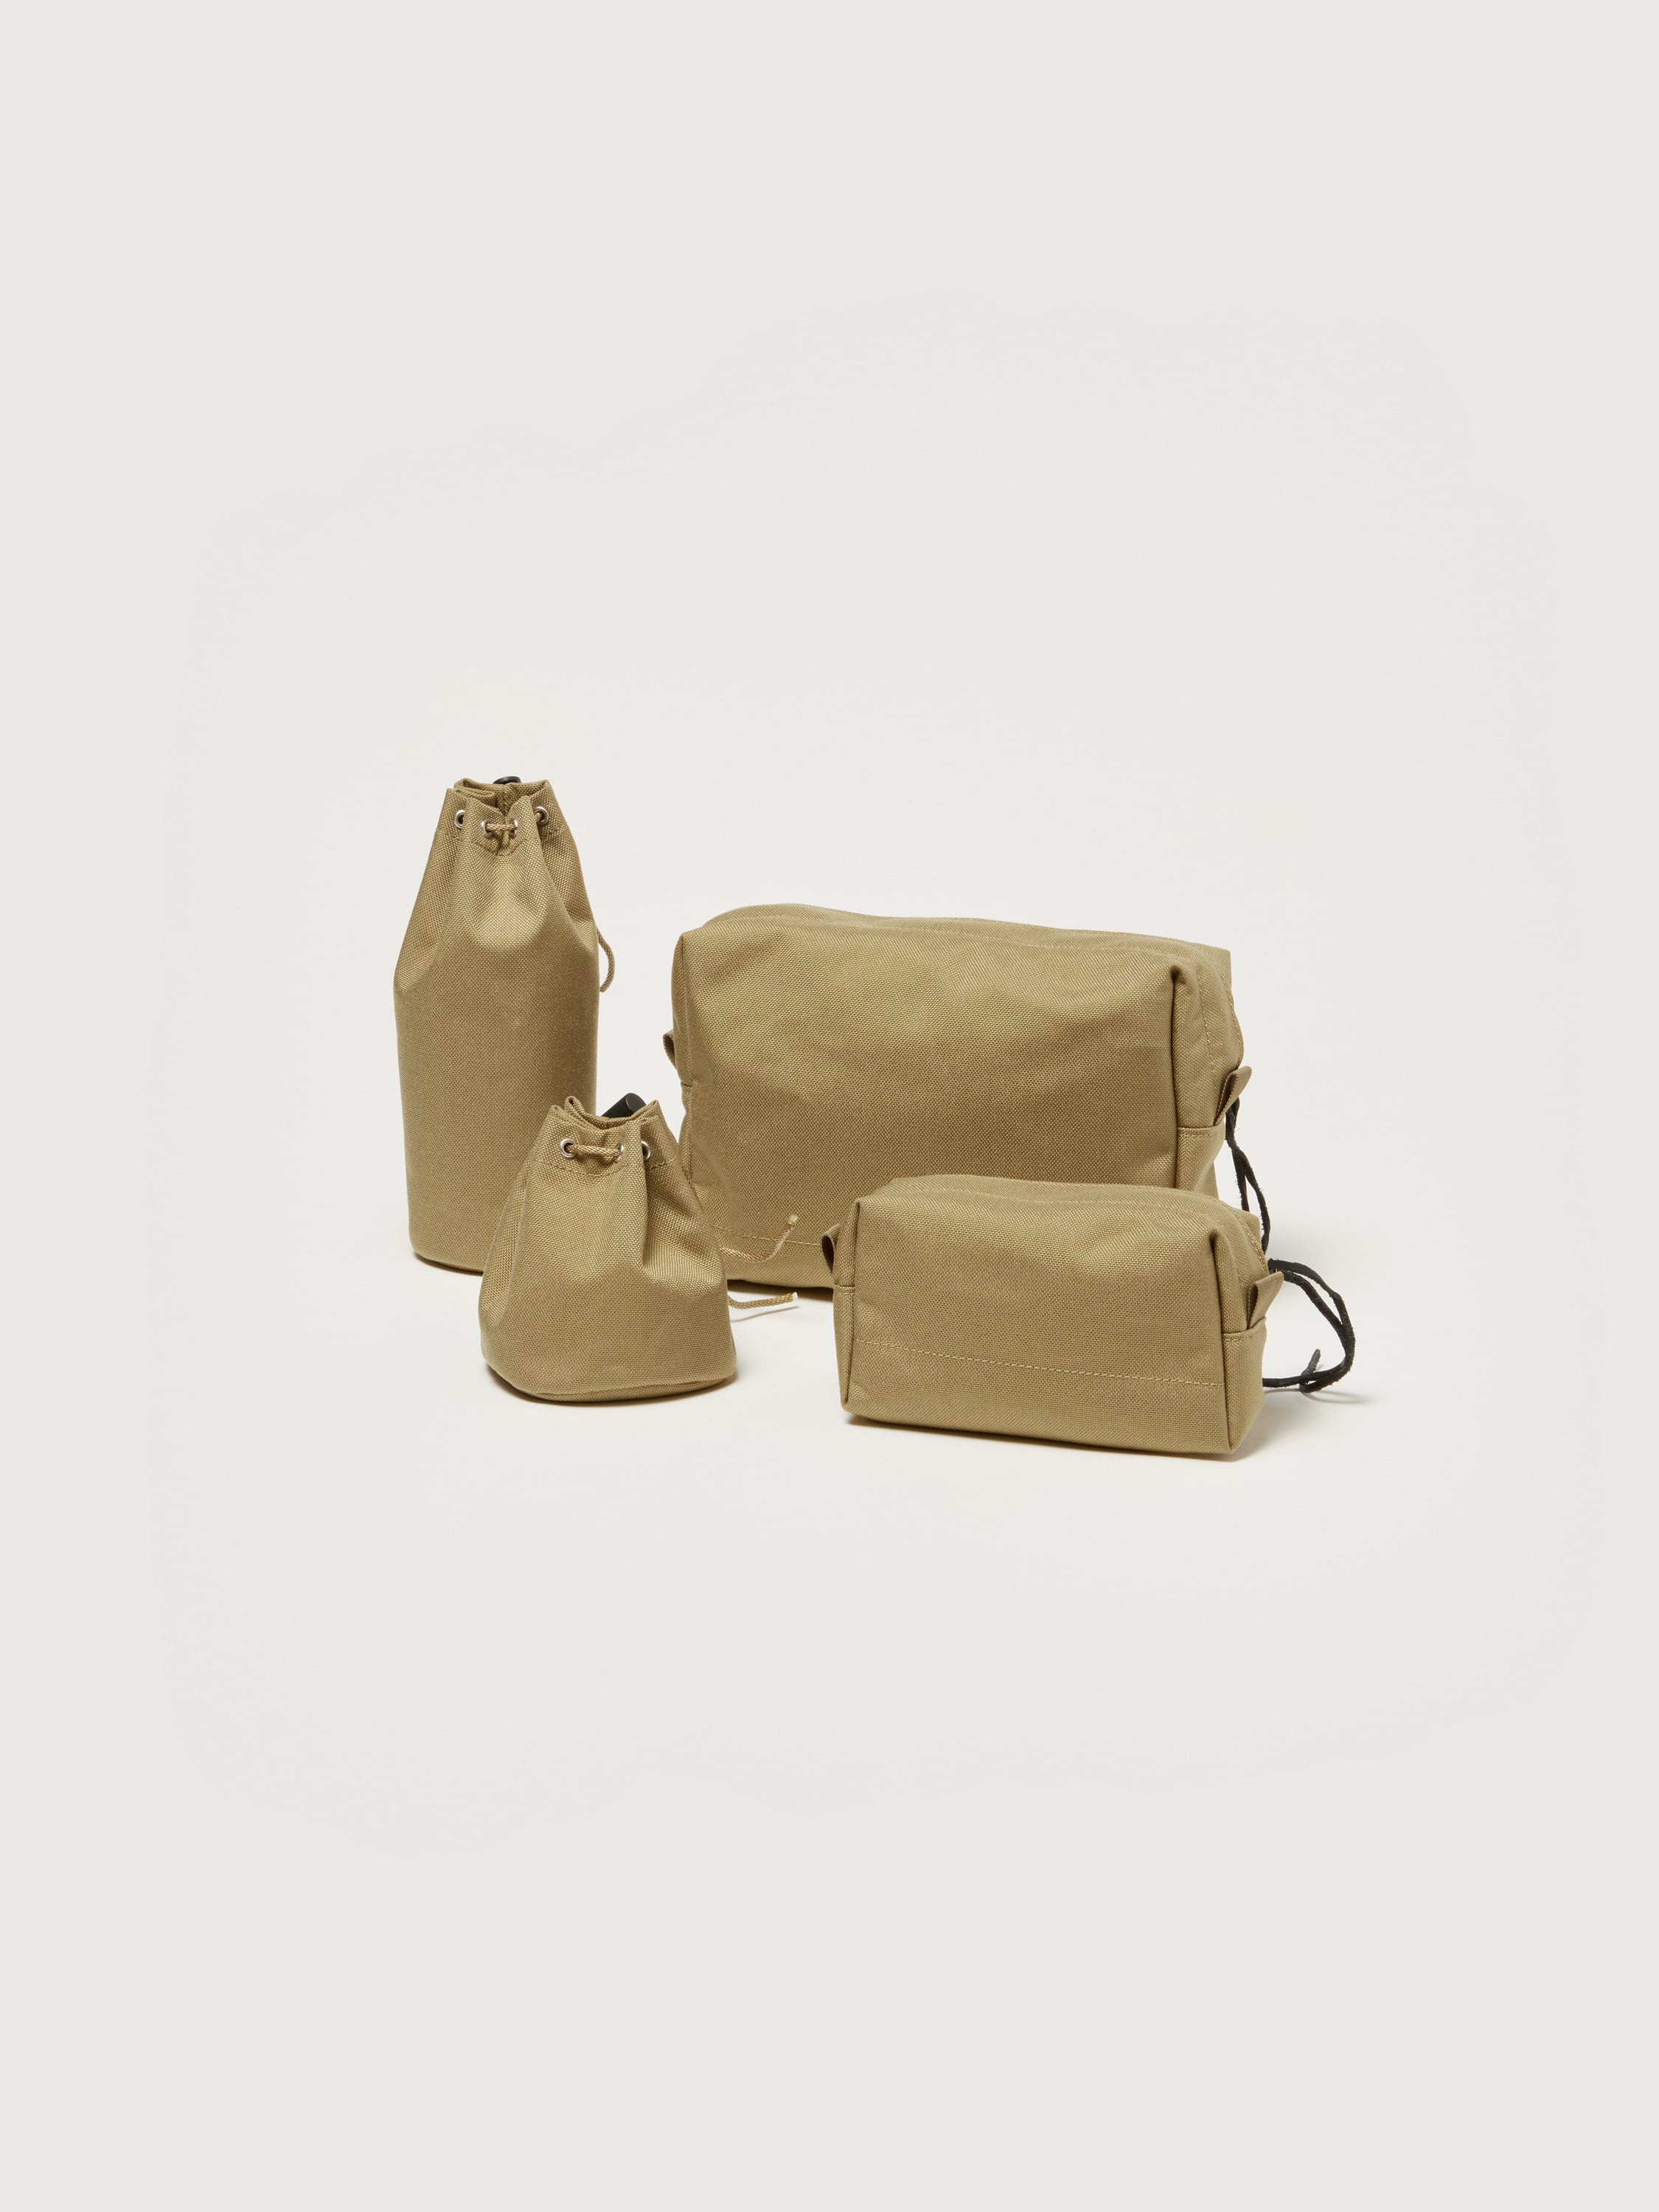 SMALL BACKPACK SET MADE BY AETA 詳細画像 BEIGE 5